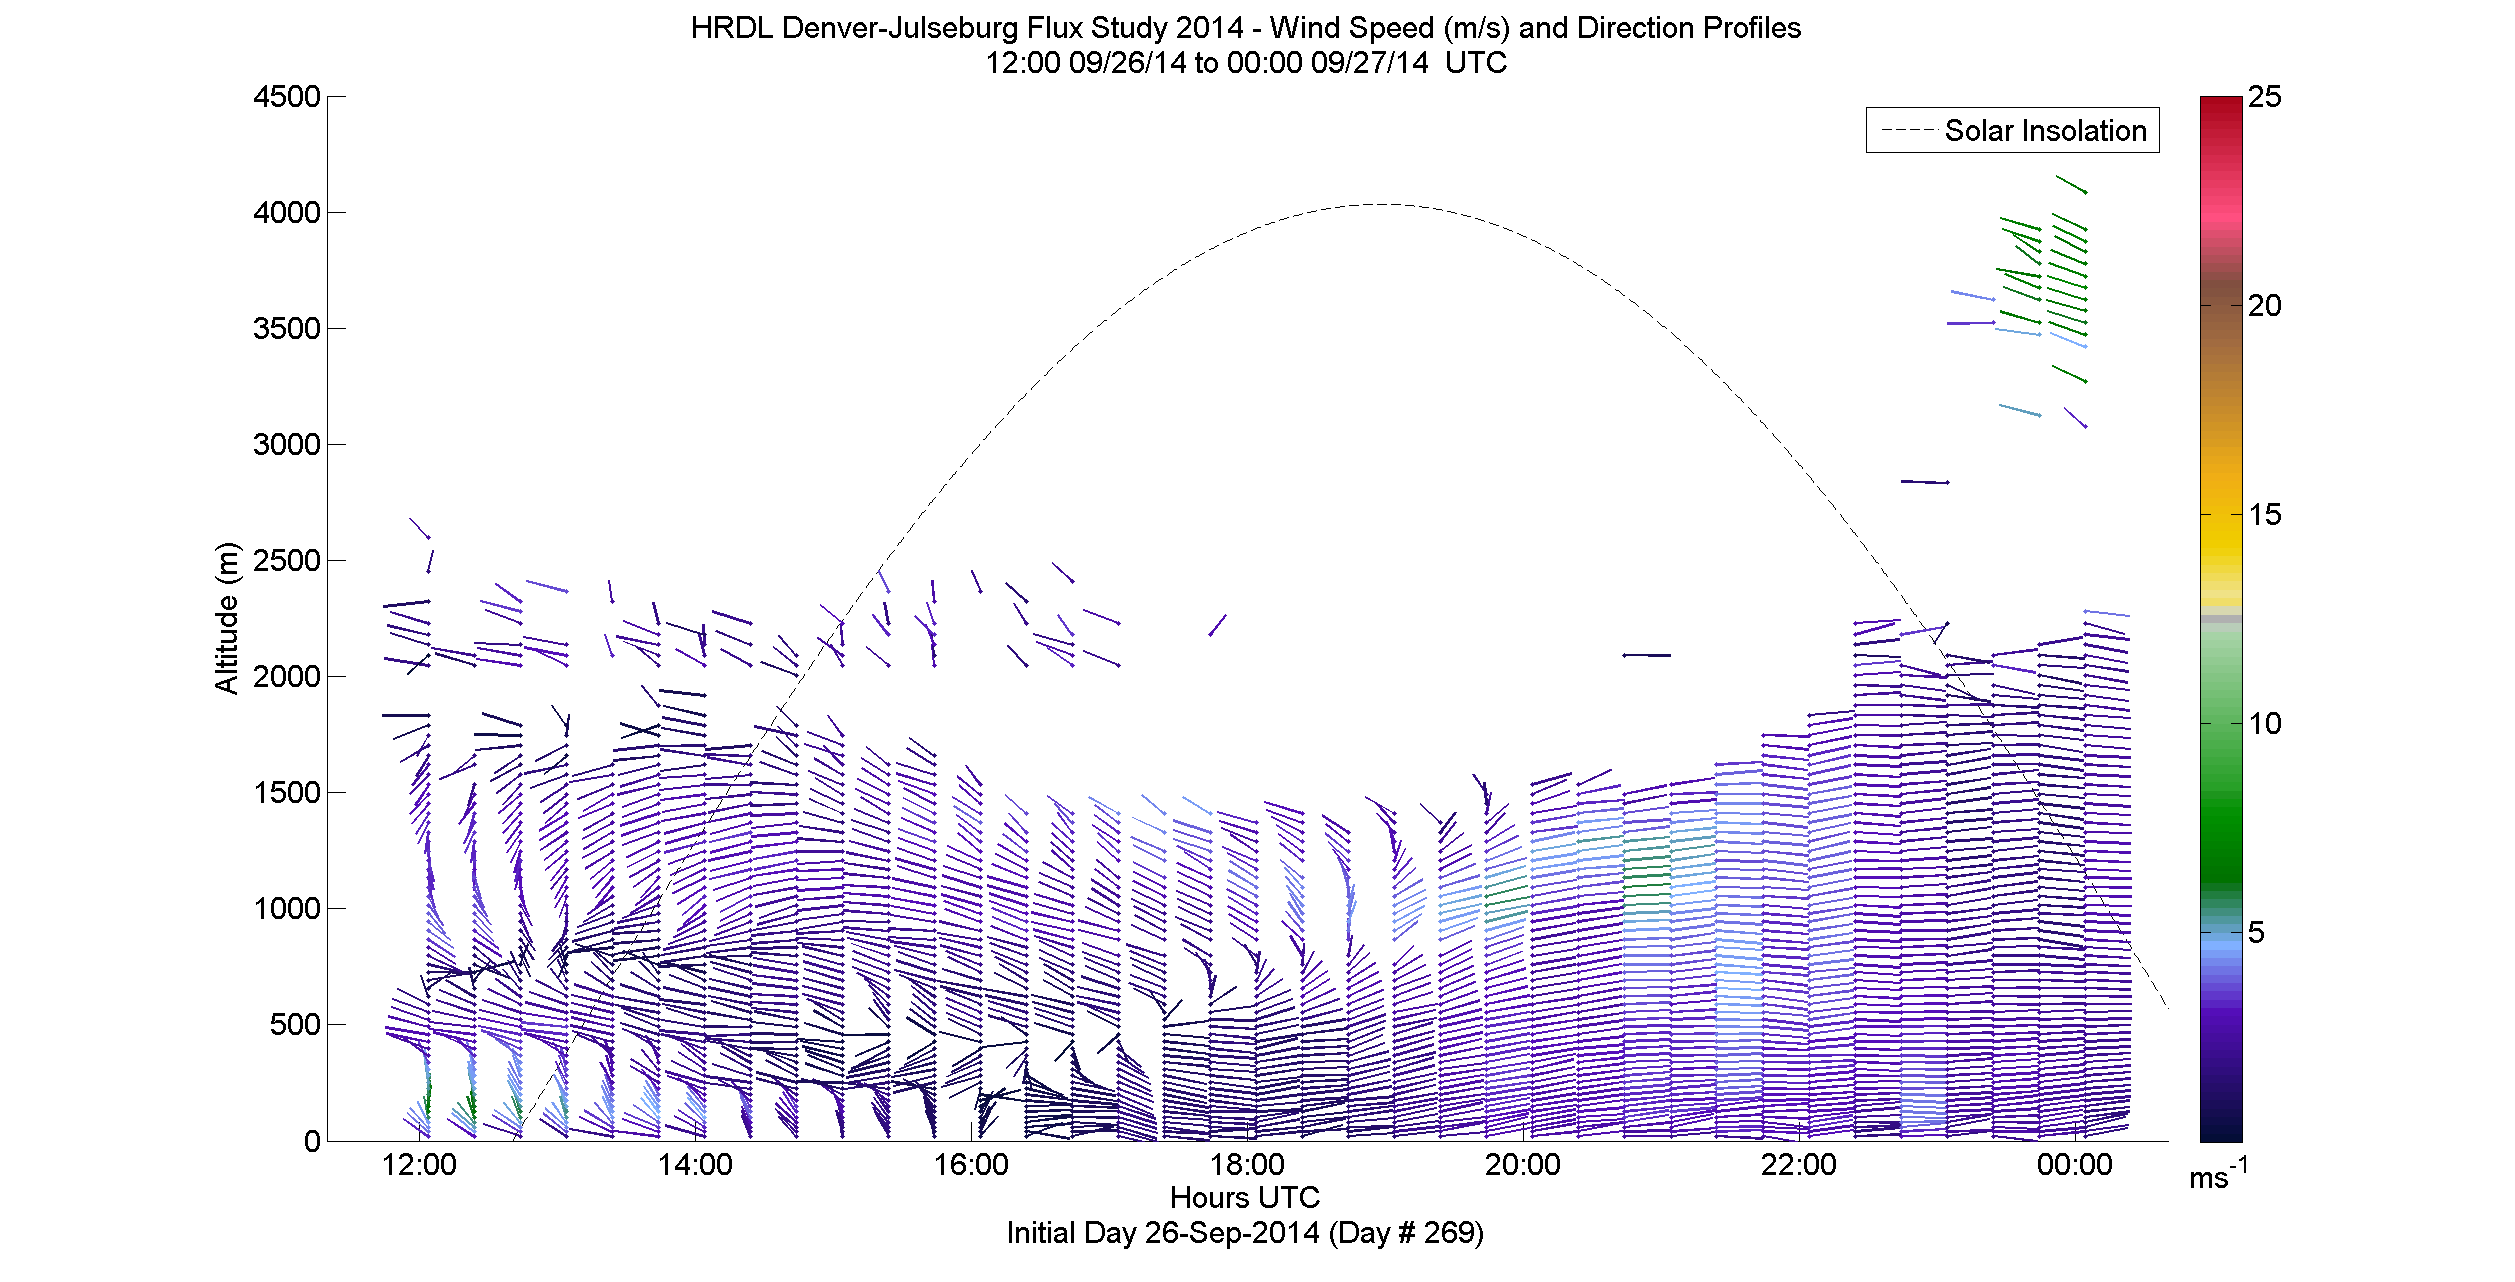 HRDL speed and direction profile - September 26 pm